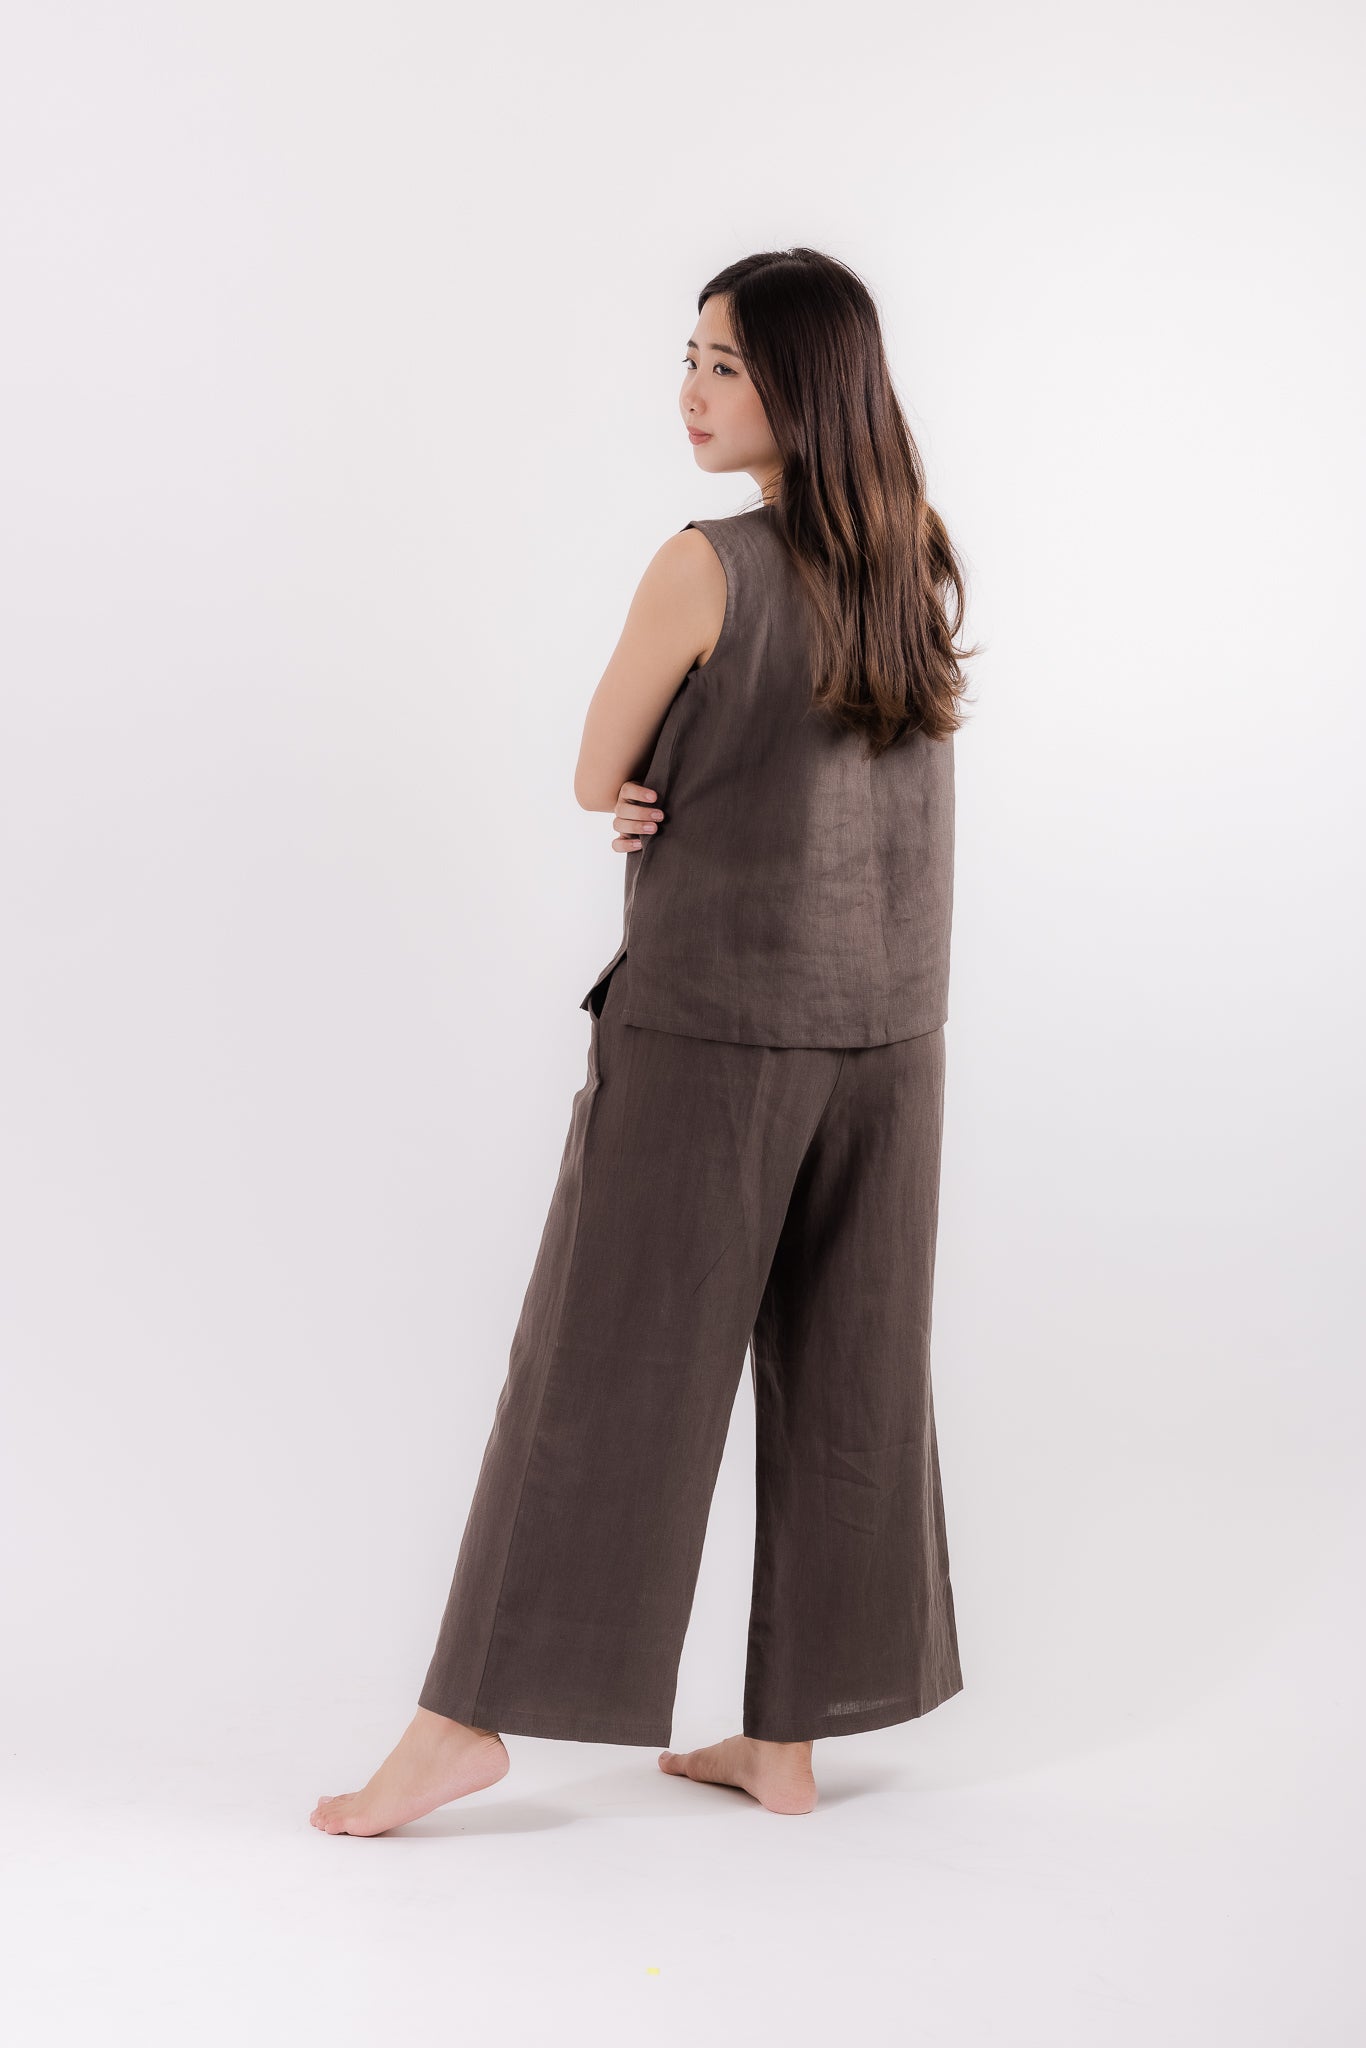 Linen Wide Leg Pants in Coffee Brown, available on You Living with free Singapore shipping